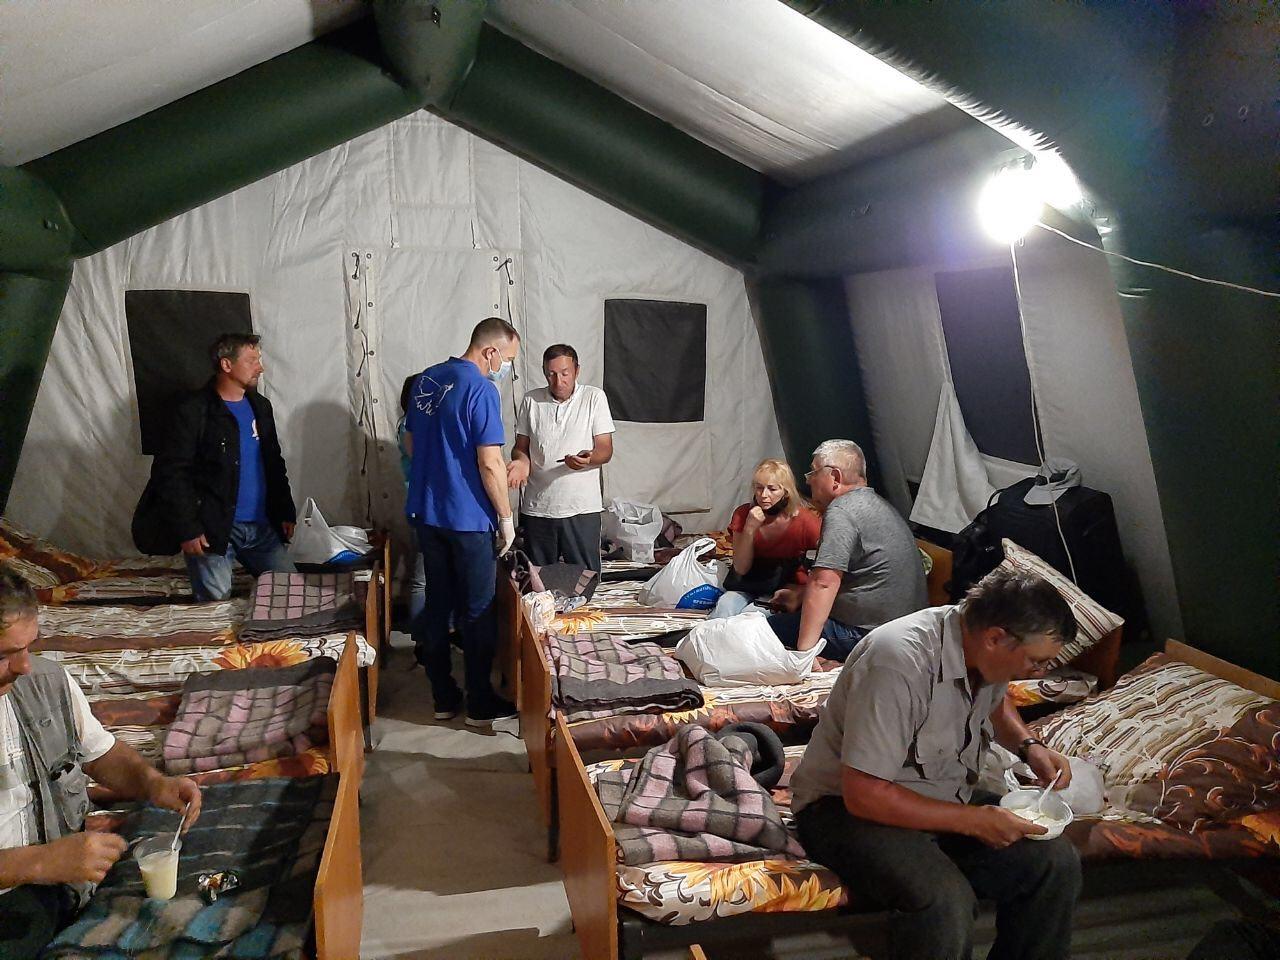 KPVV Novotroitsk. People are preparing to spend the night in a tent.